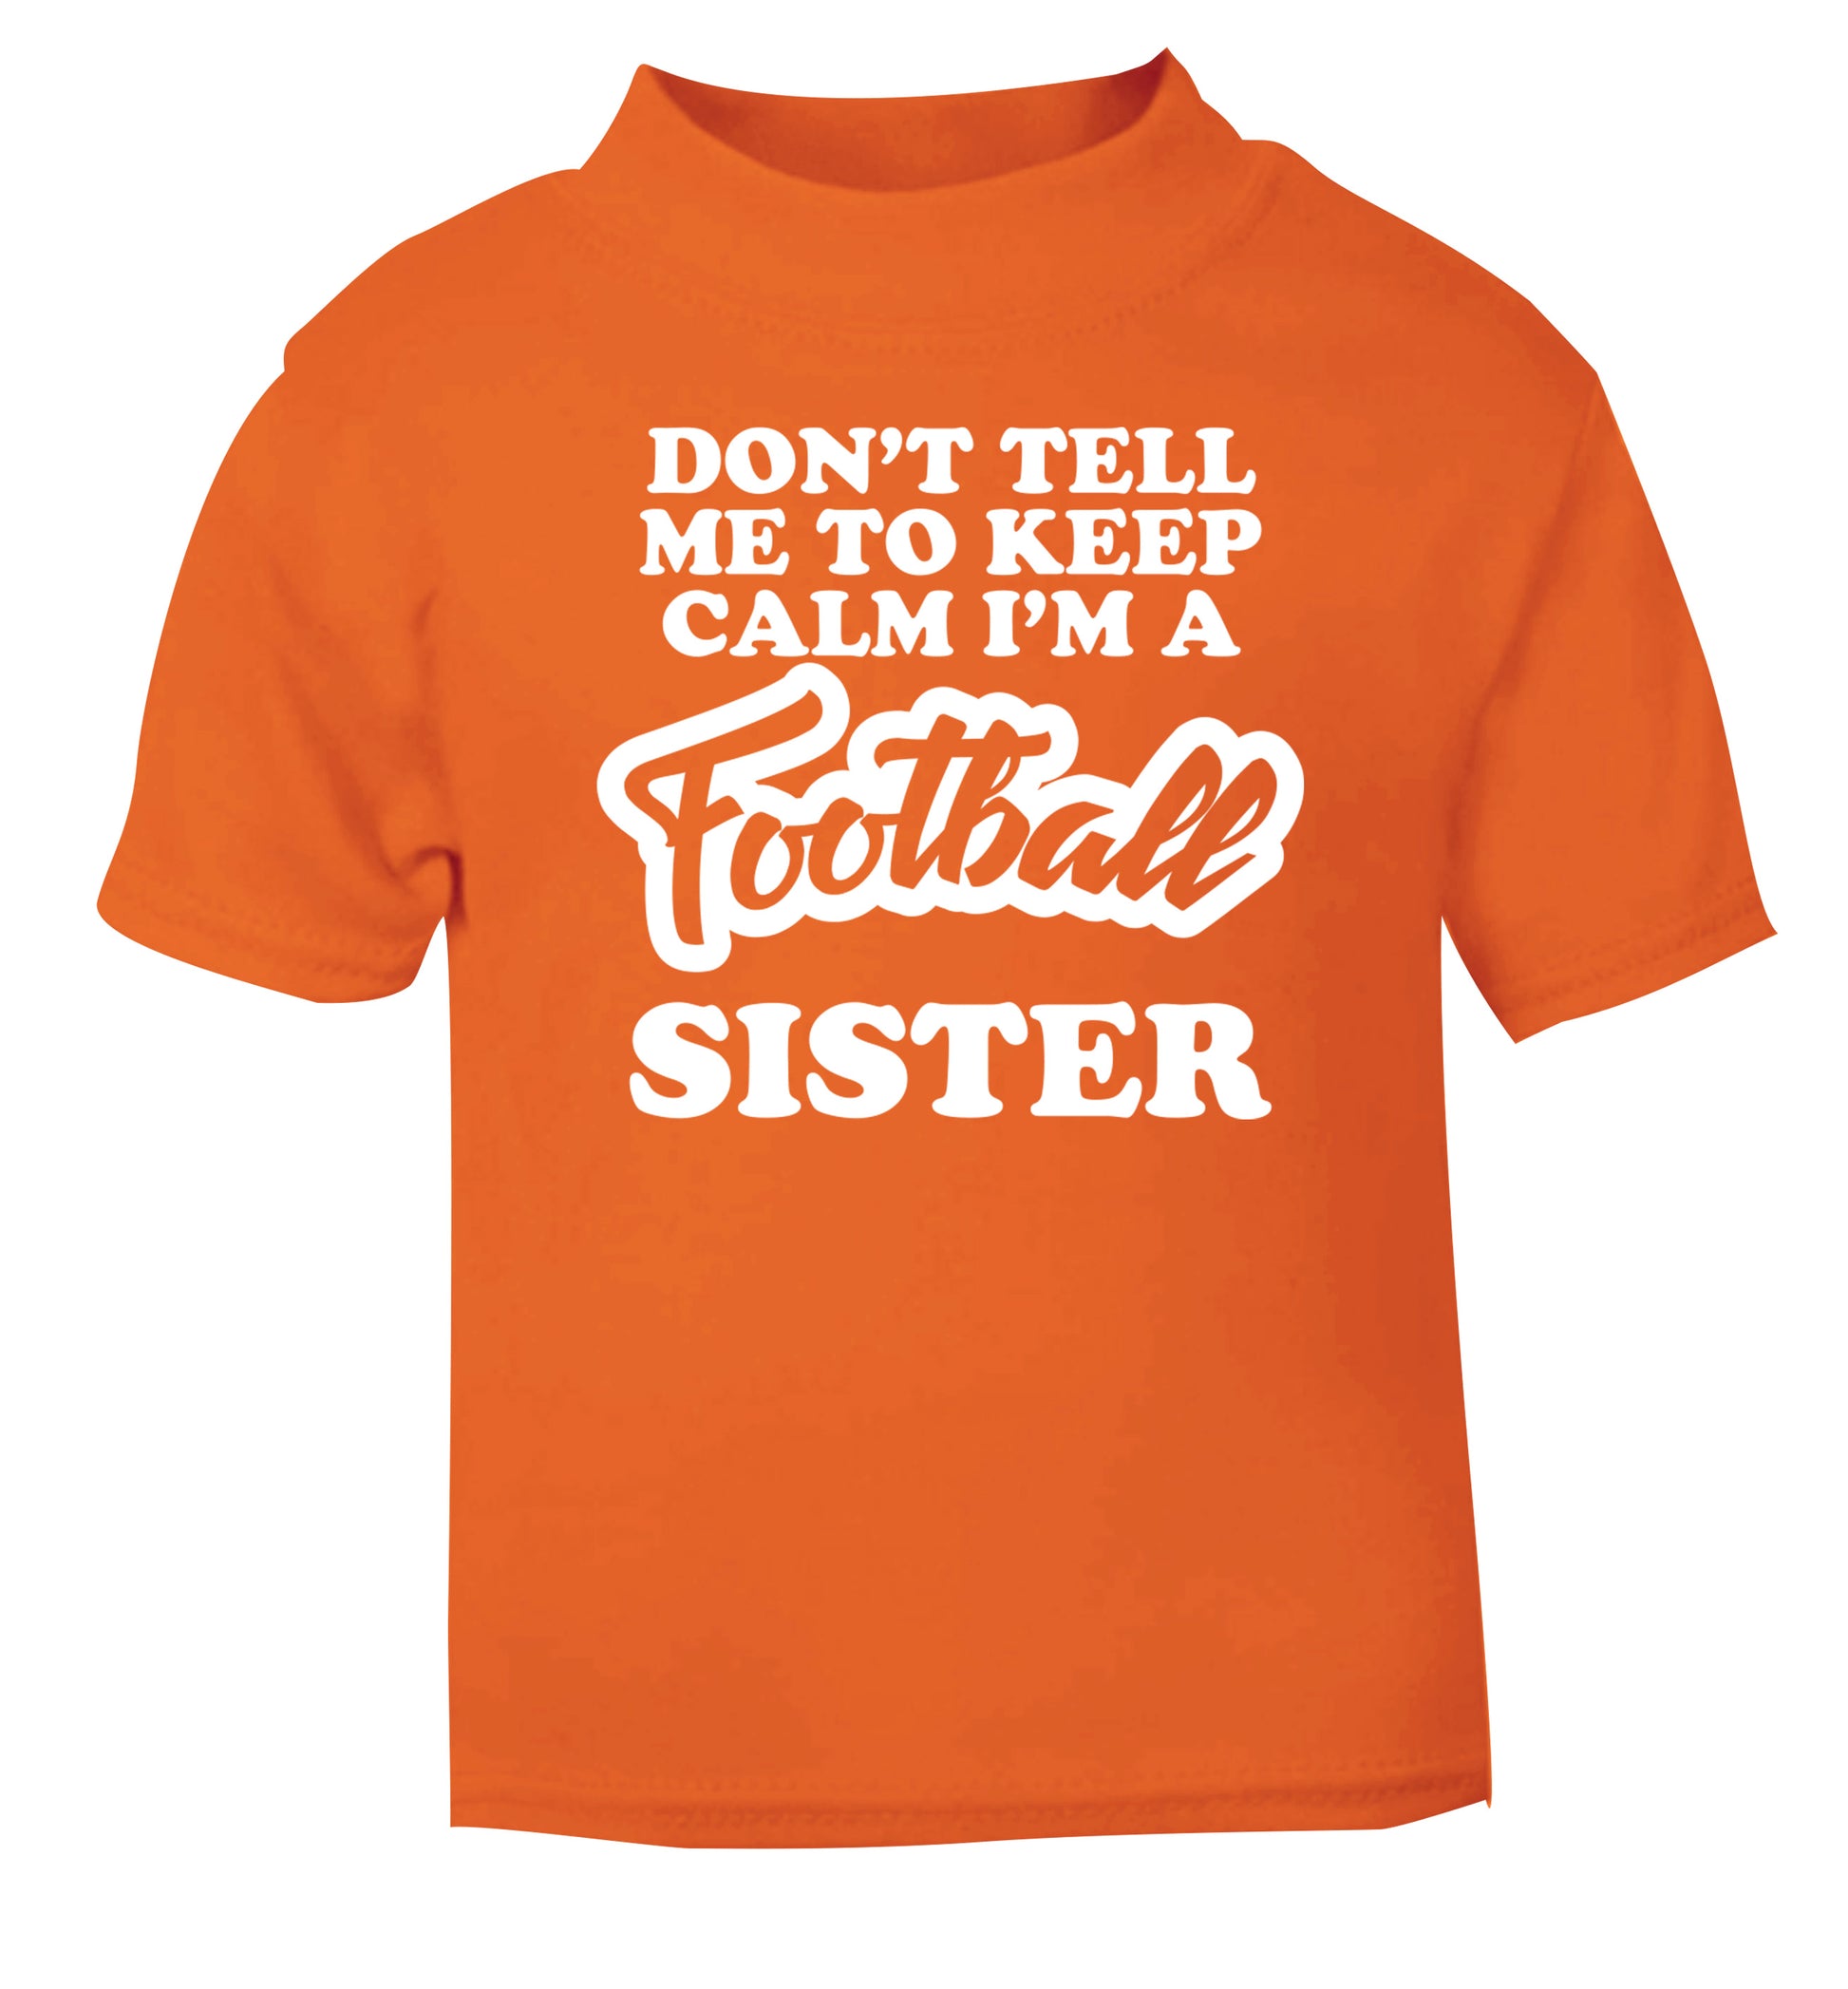 Don't tell me to keep calm I'm a football sister orange Baby Toddler Tshirt 2 Years